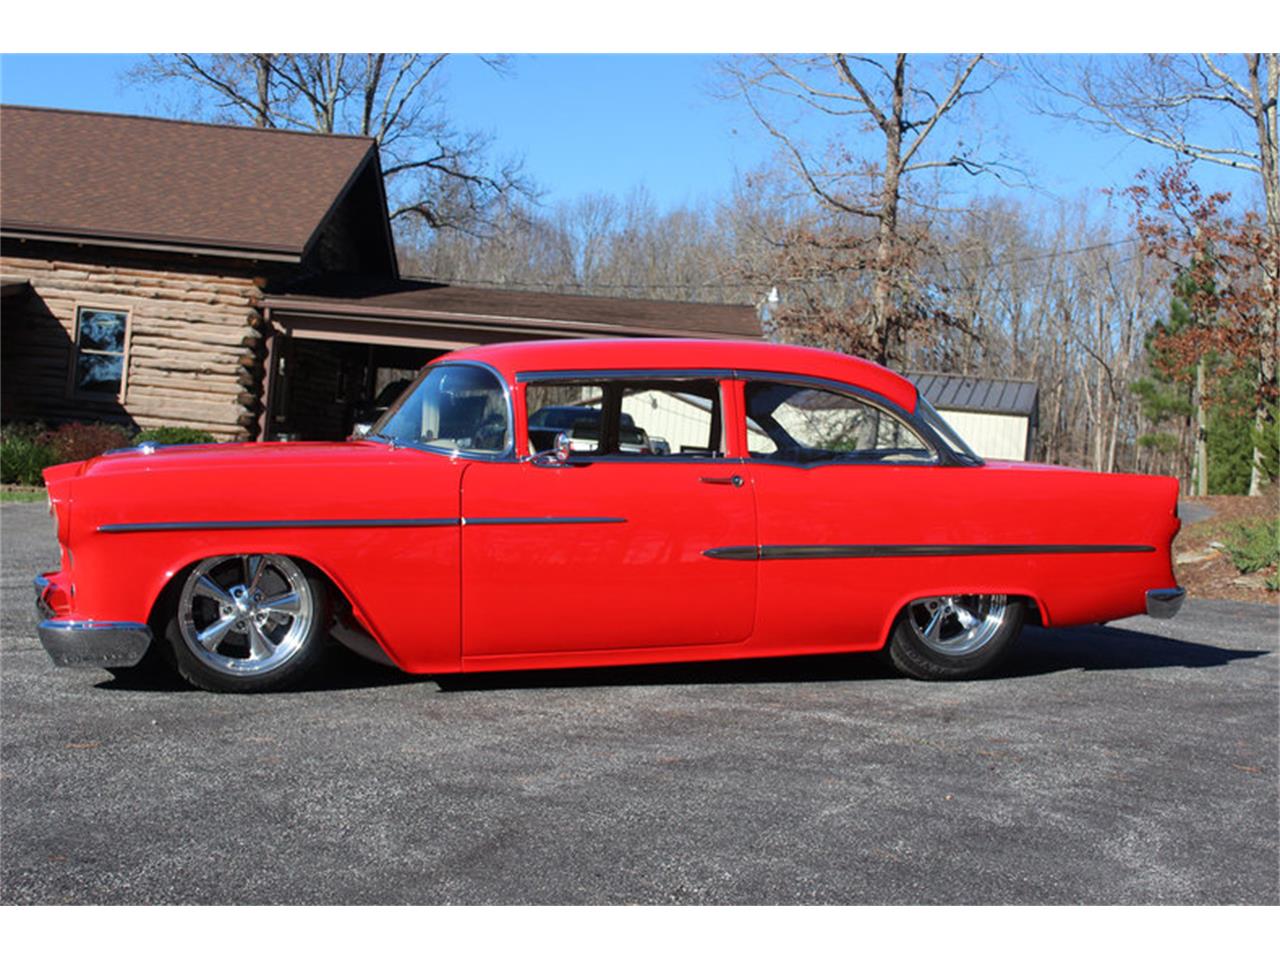 1955 Chevrolet Bel Air Pro Touring Resto Rod For Sale Cc 946206 4056